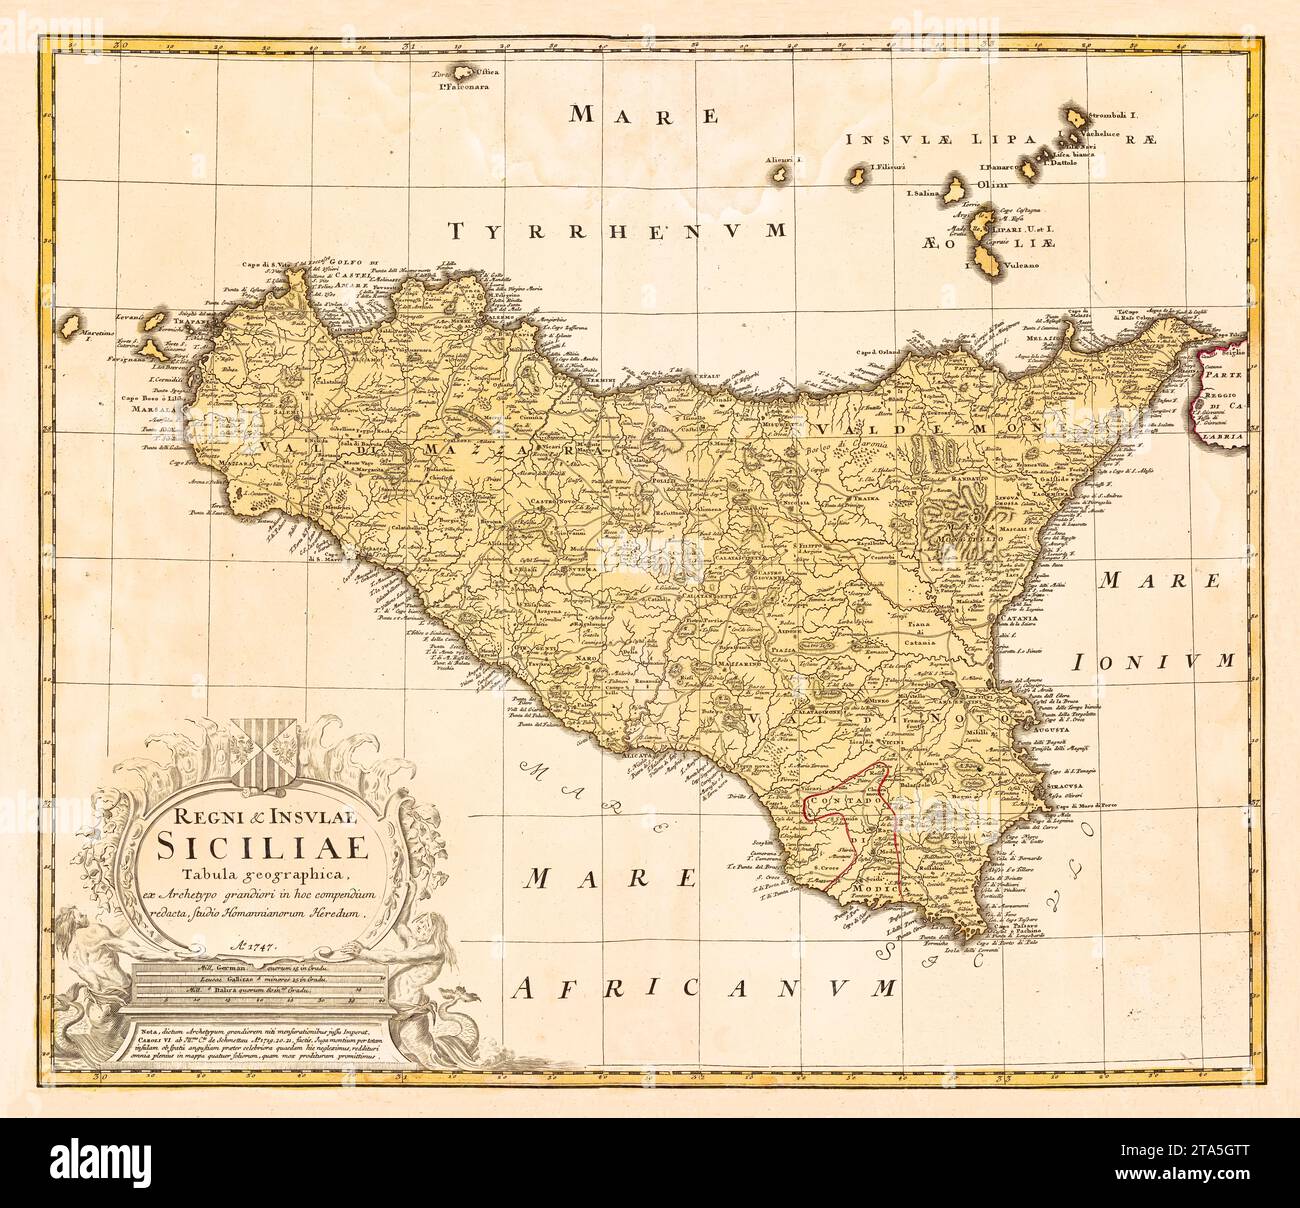 Old map of Sicily. By Homann, publ. in Nuremberg, 1747 Stock Photo